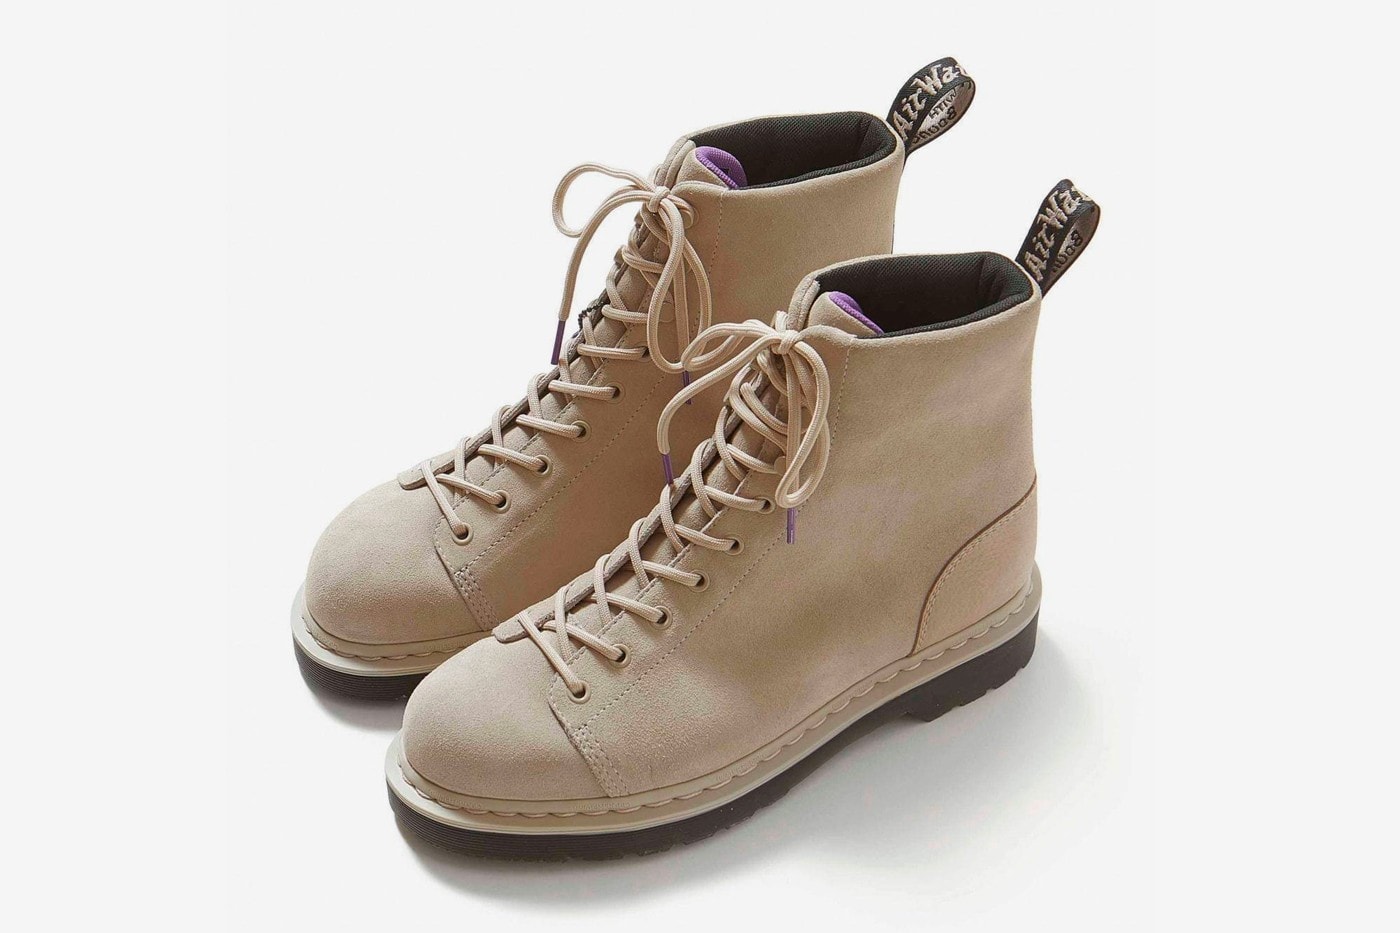 THE NORTH FACE PURPLE LABEL x Dr. Martens 全新絨面革聯乘靴款發佈